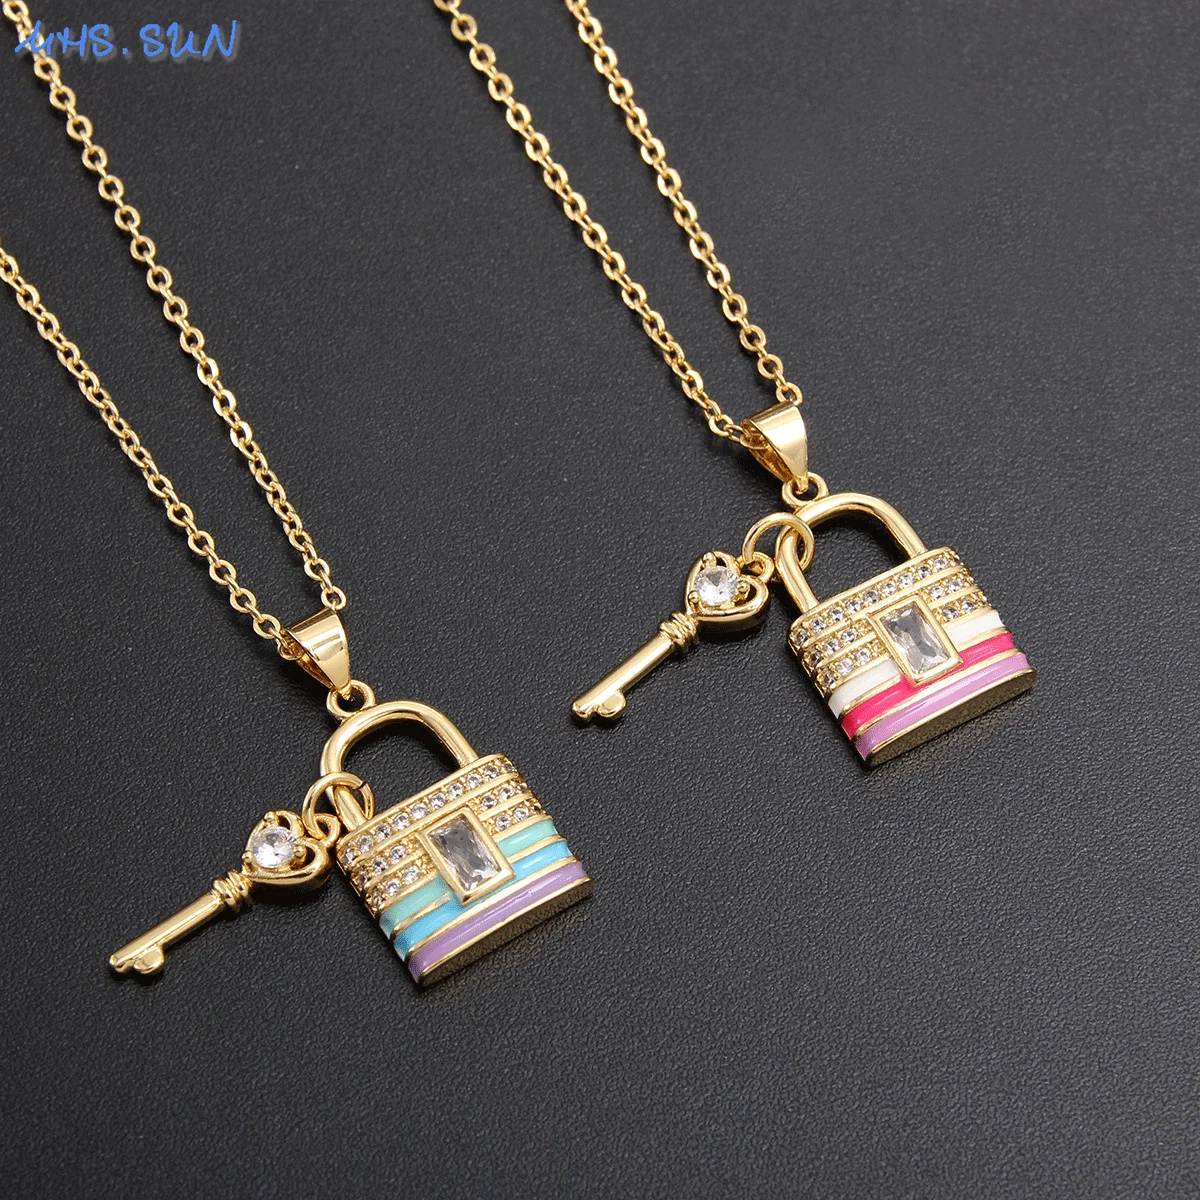 

MHS.SUN New Arrival Key Lock Pendant Necklace Cubic Zirconia Necklaces Clavicle Chain Fashion Lover Jewelry For Women Men Gifts